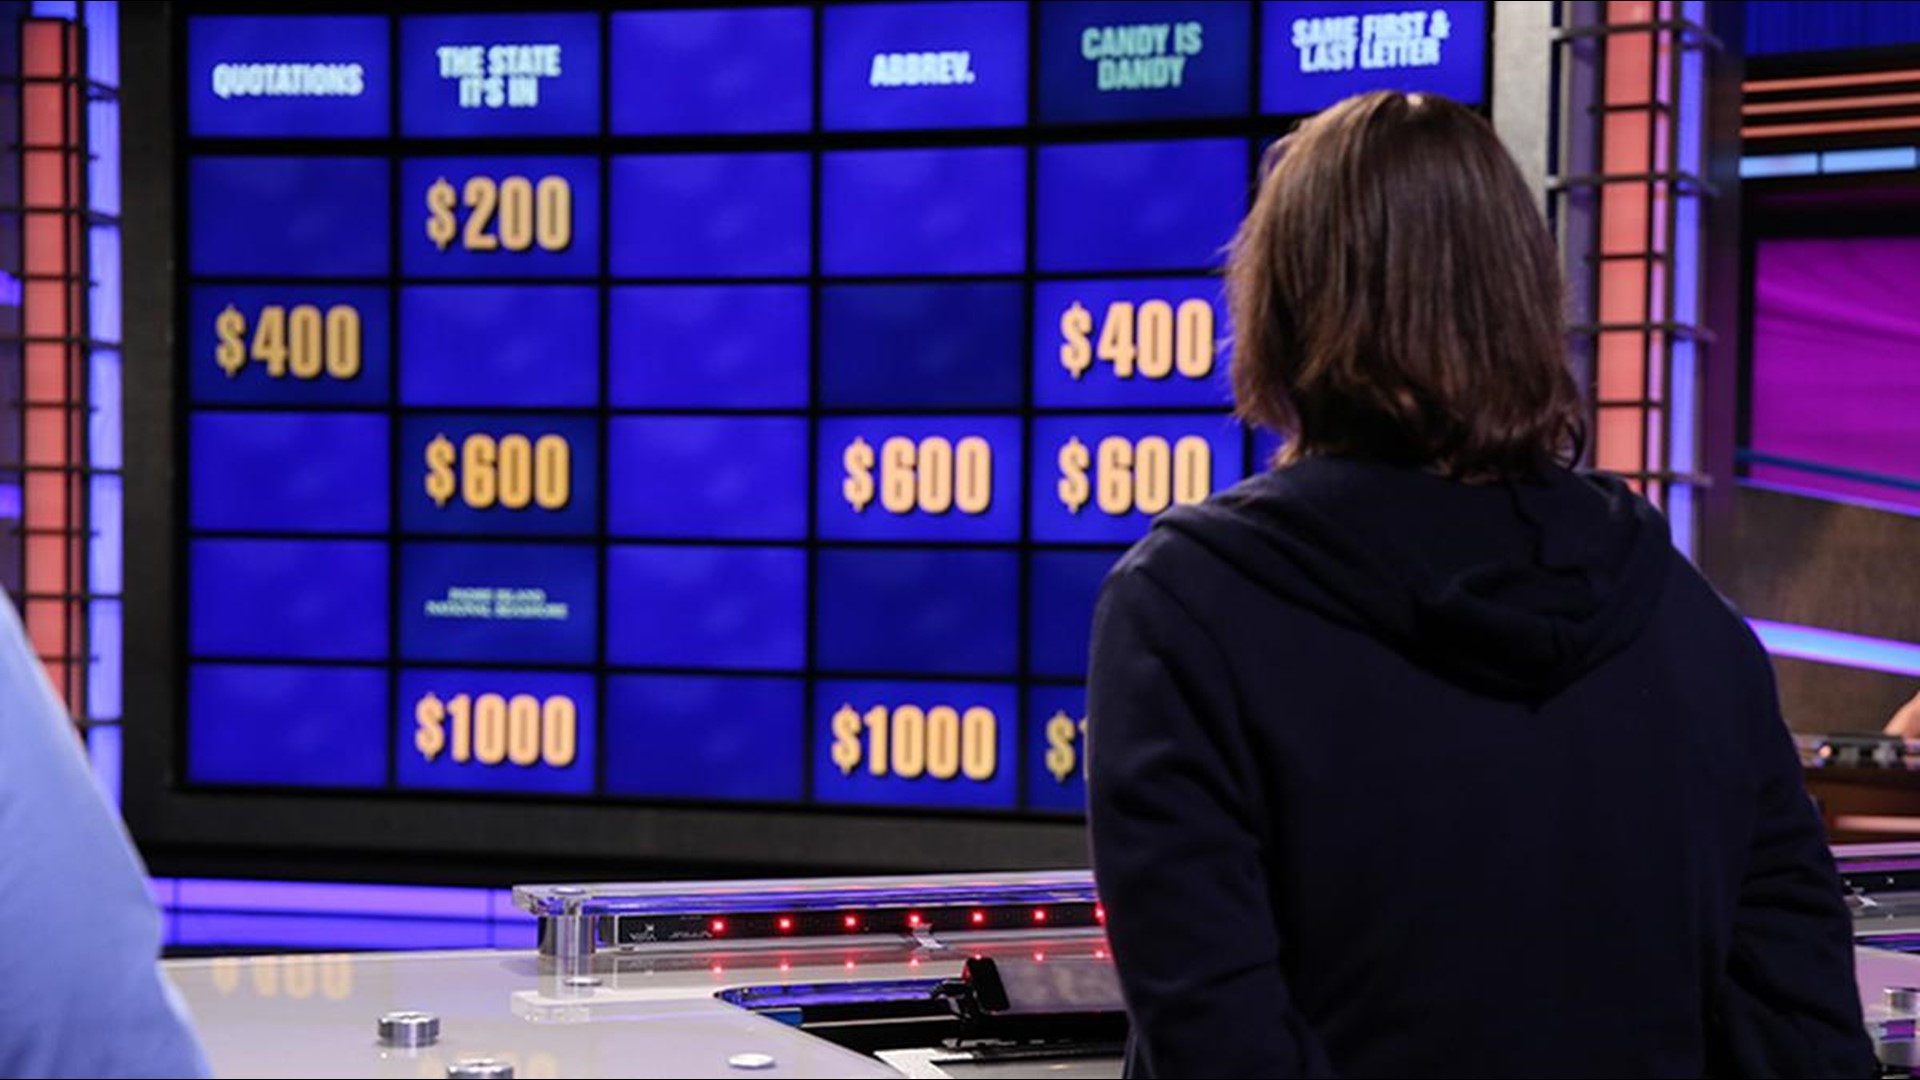 Results of Final Jeopardy on March 14, 2019